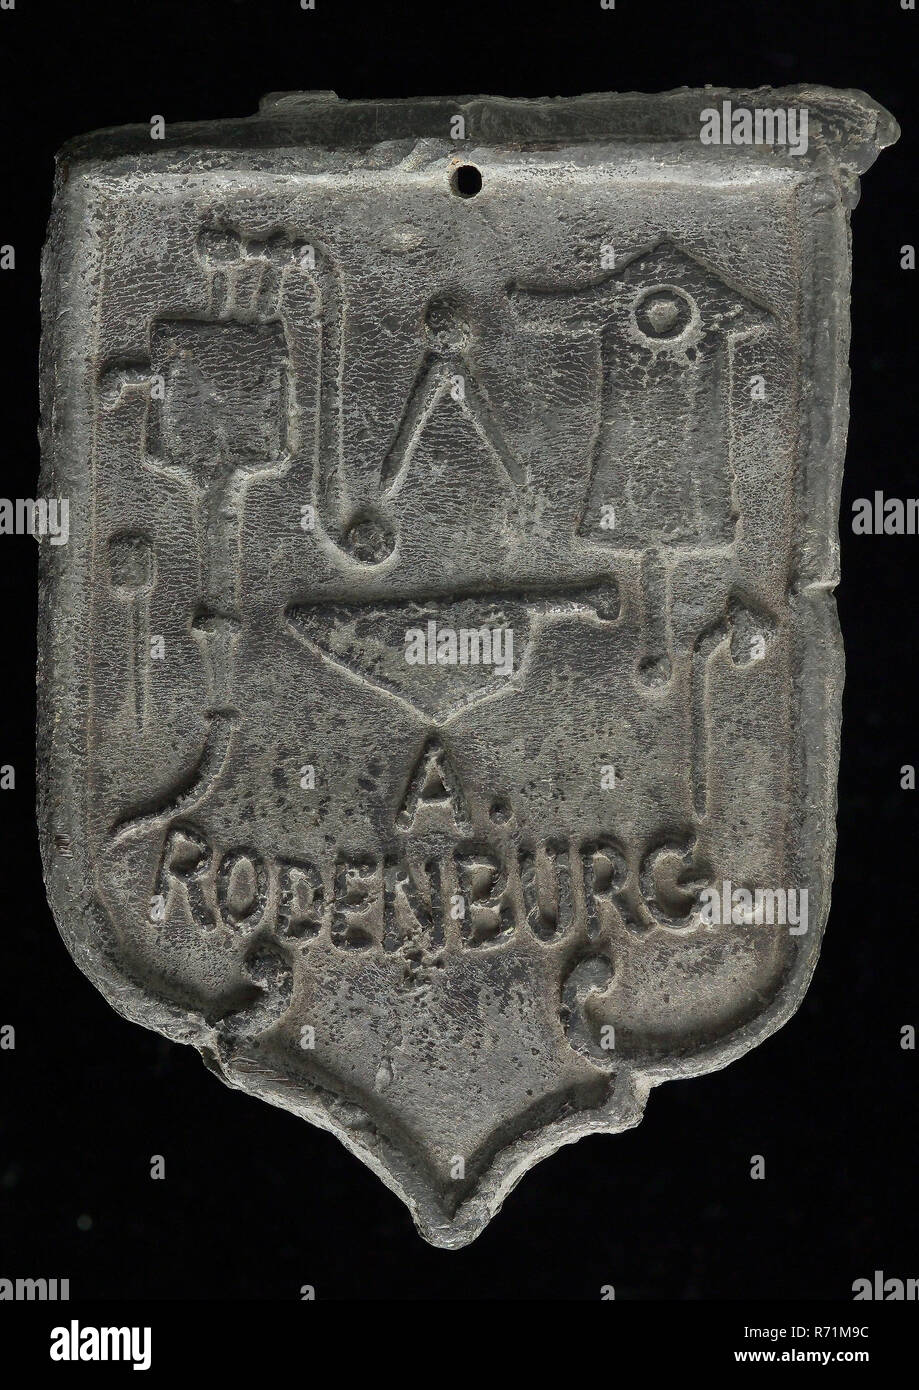 A. Rodenburg, Roof bonnet, shield-shaped cover plate with . Rodenburg and various guide tools, Barrier lead hallmark metal lead, Roof bonnet shield-shaped cover plate of the nails with the name of the plumber . Rodenburg and above it various guide tools, . RODENBURG. leader Stock Photo